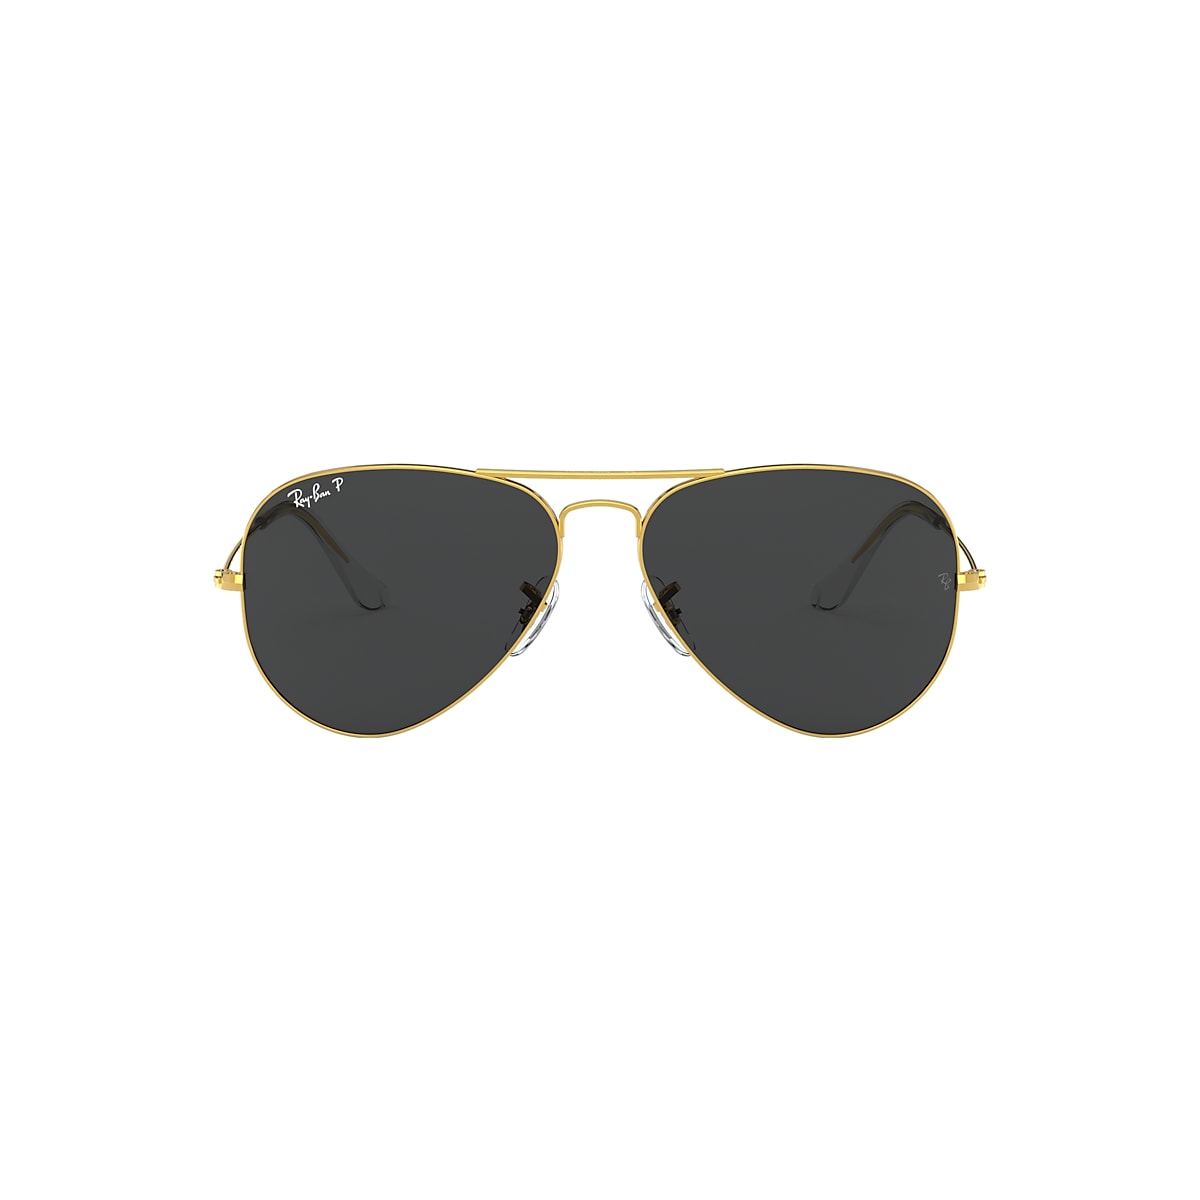 Aviator Classic Sunglasses in Gold and Black | Ray-Ban®